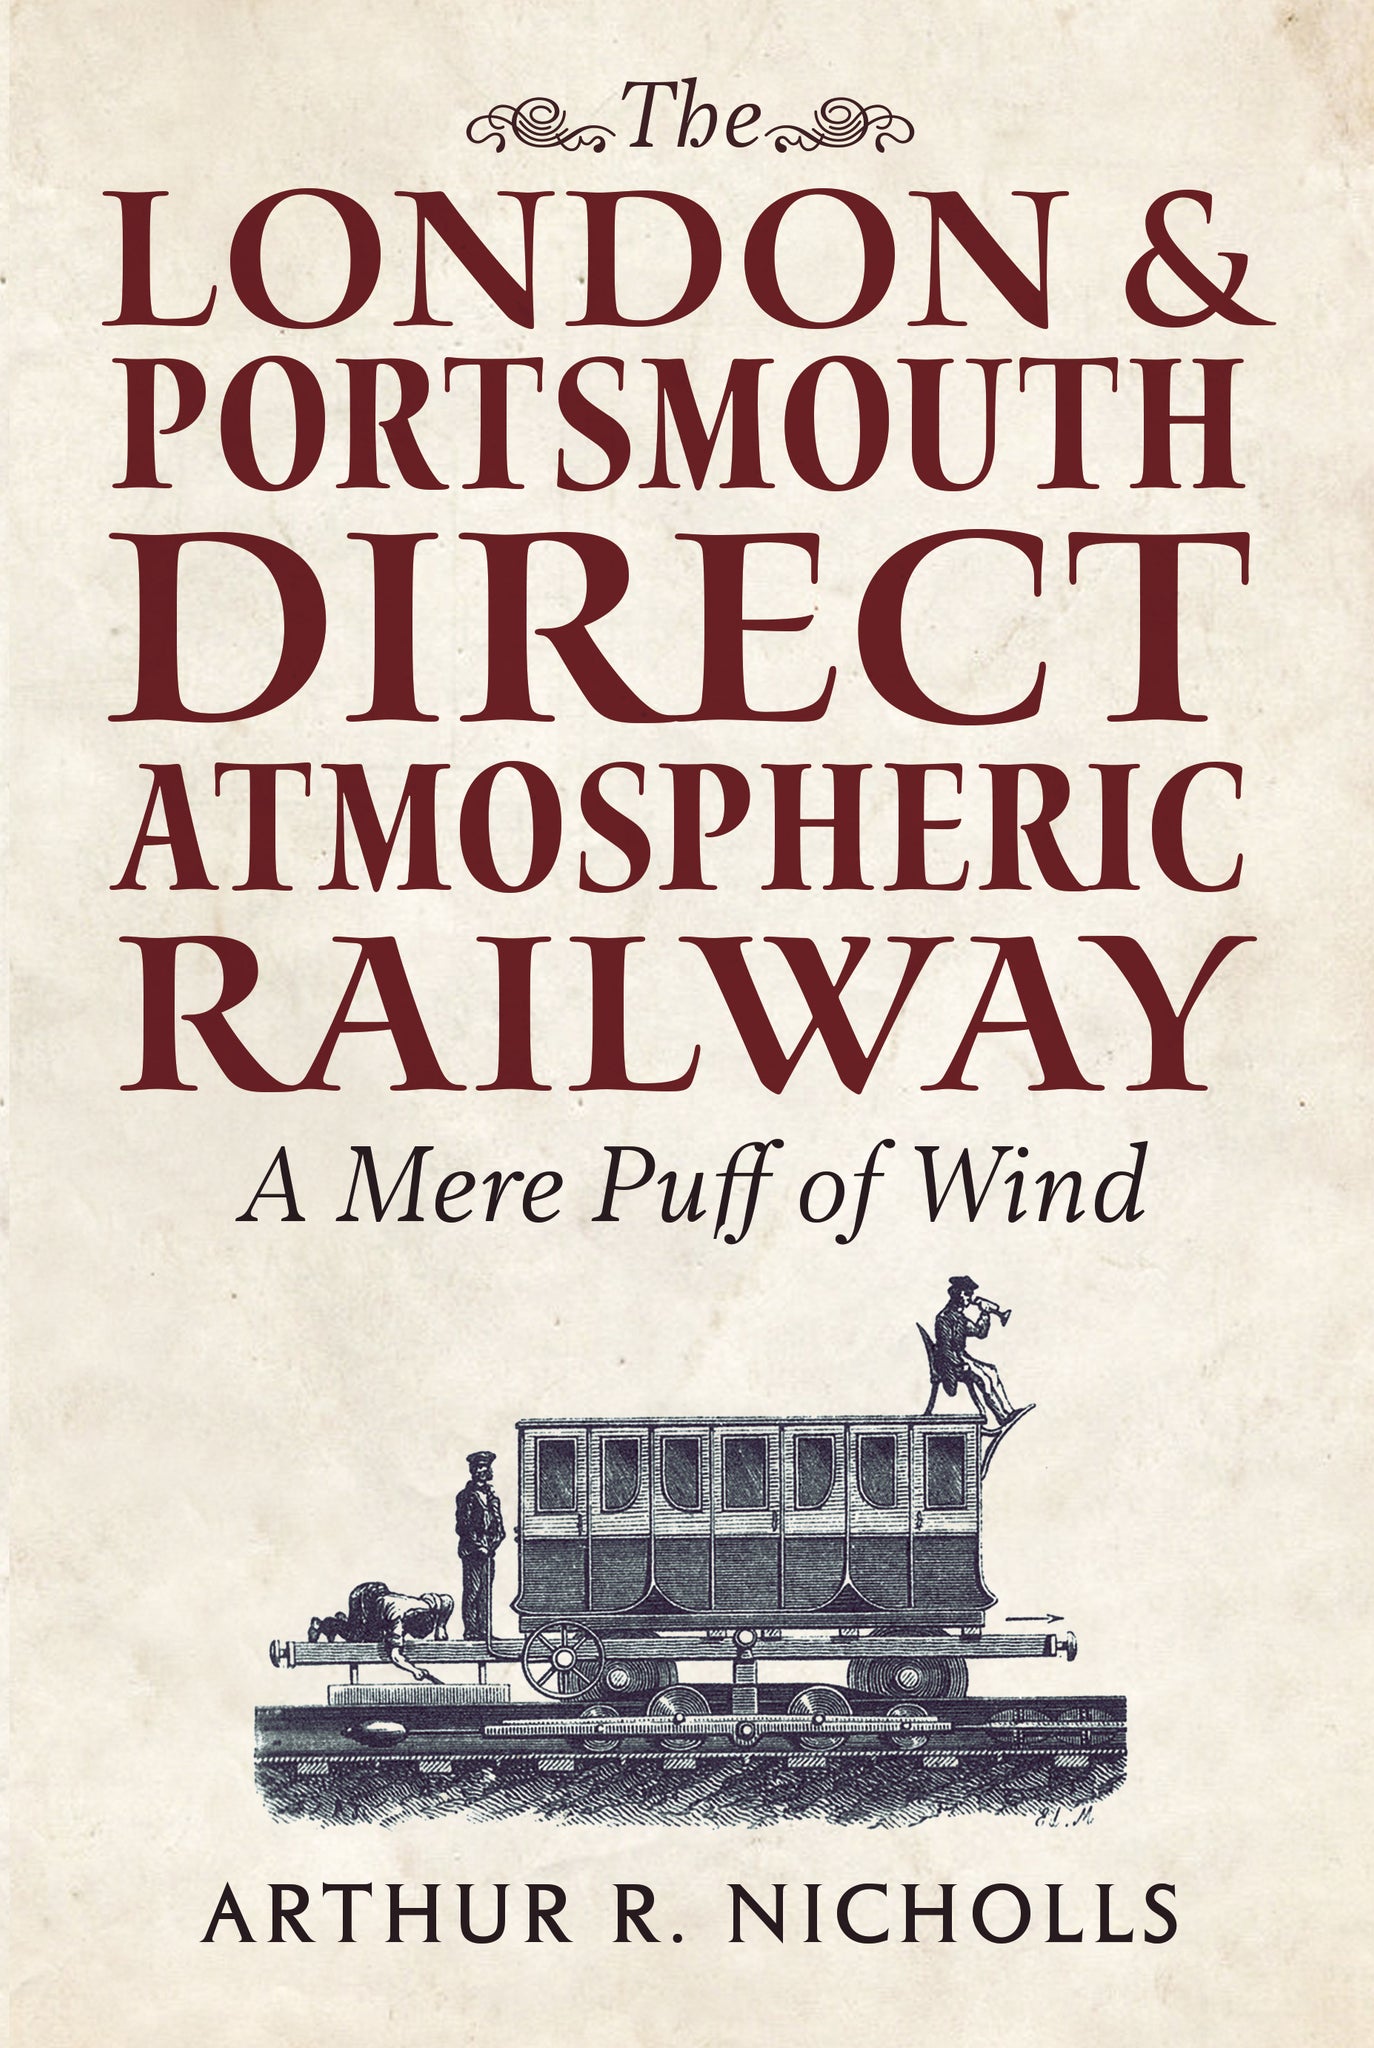 The London & Portsmouth Direct Atmospheric Railway: A Mere Puff of Wind